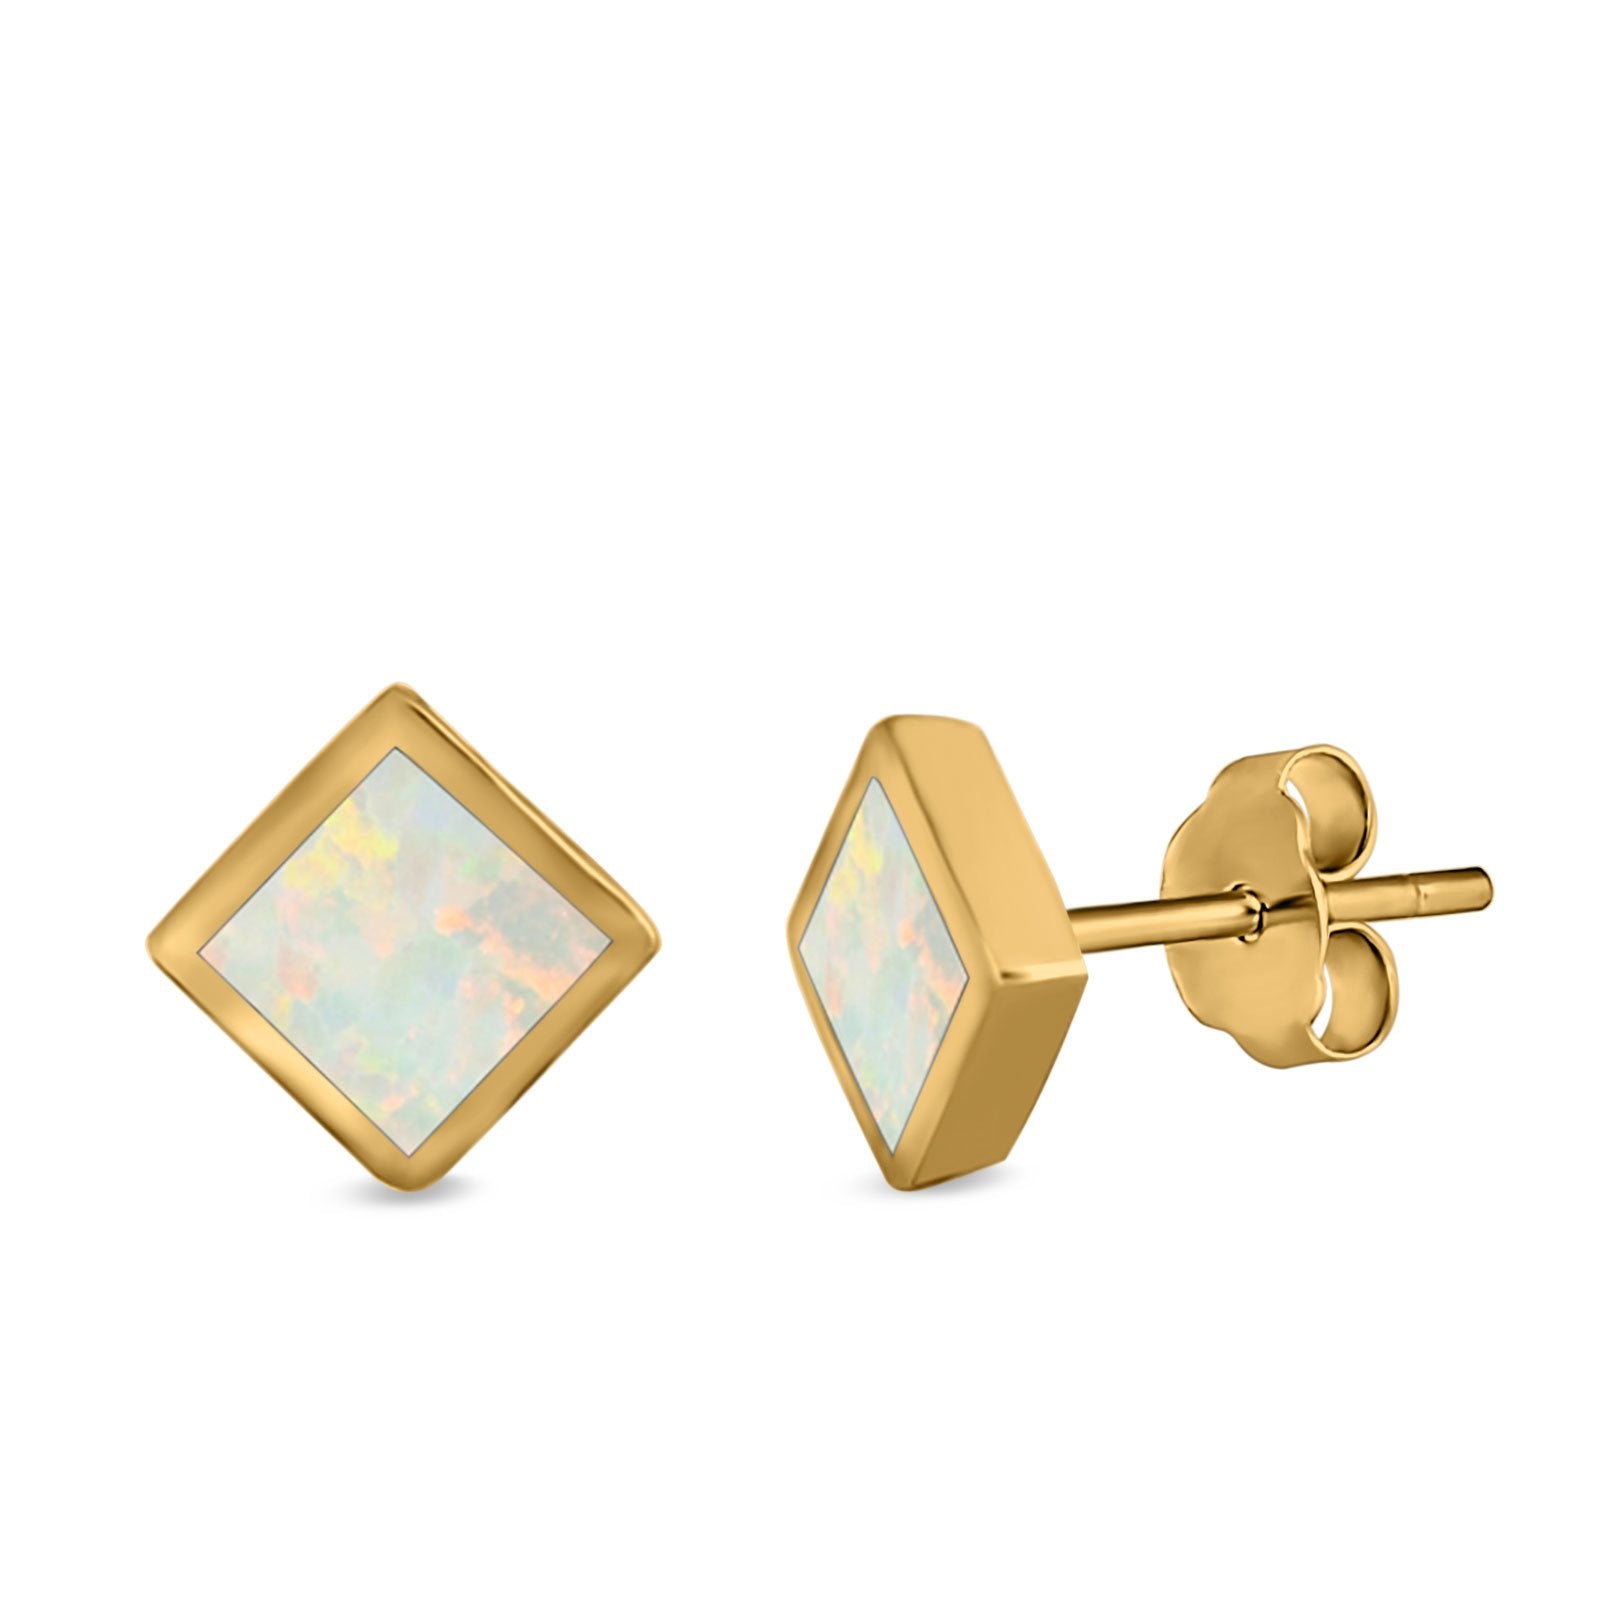 Square Solitaire Stud Earrings Created Opal 925 Sterling Silver (6mm)